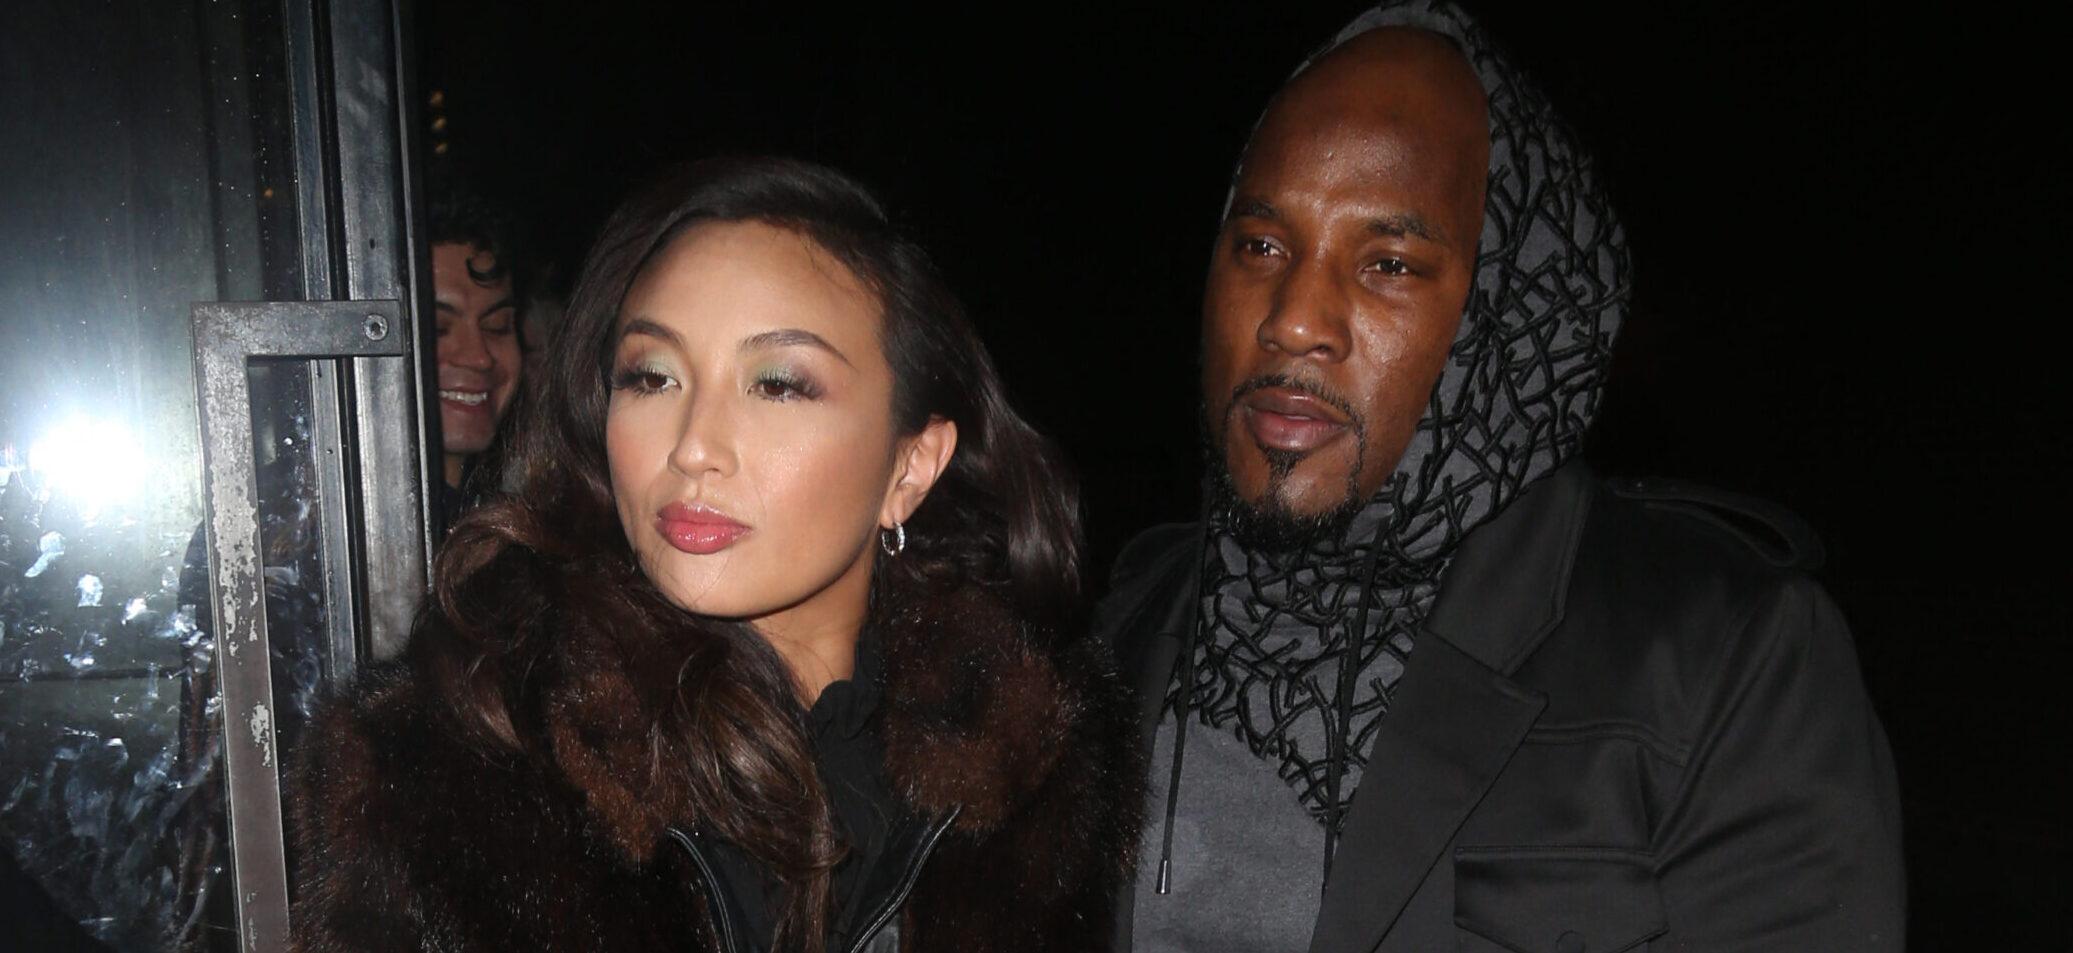 Rapper Jeezy Files Motion To Vacate Mediated Agreement With Jeannie Mai In Nasty Divorce Battle